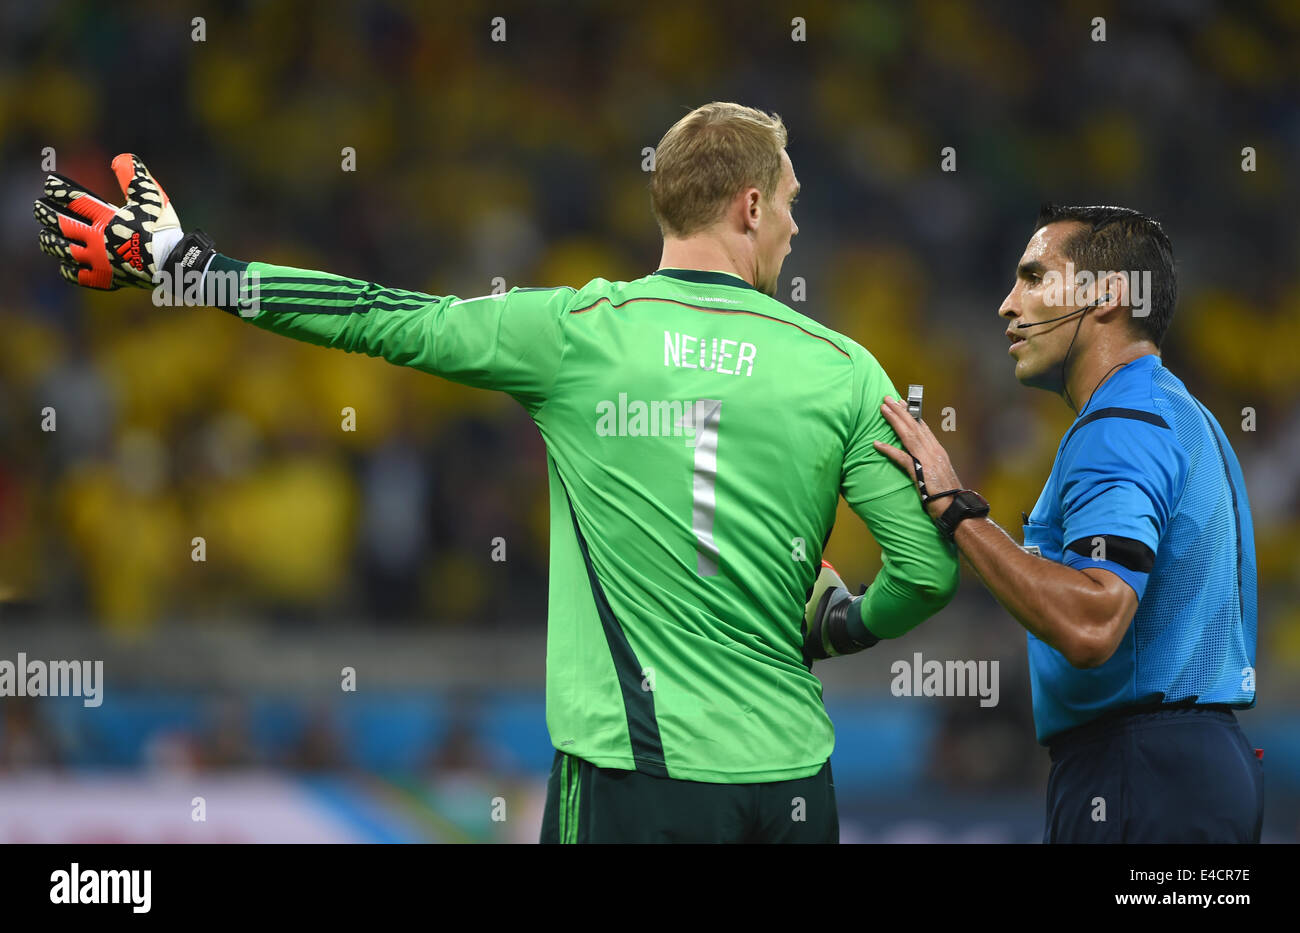 Belo Horizonte, Brazil. 08th July, 2014. German goal keeper Manuel Neuer argues with referee Marco Rodriguez of Mexico during the FIFA World Cup 2014 semi-final soccer match between Brazil and Germany at Estadio Mineirao in Belo Horizonte, Brazil, 08 July 2014. Photo: Marcus Brandt/dpa/Alamy Live News Stock Photo